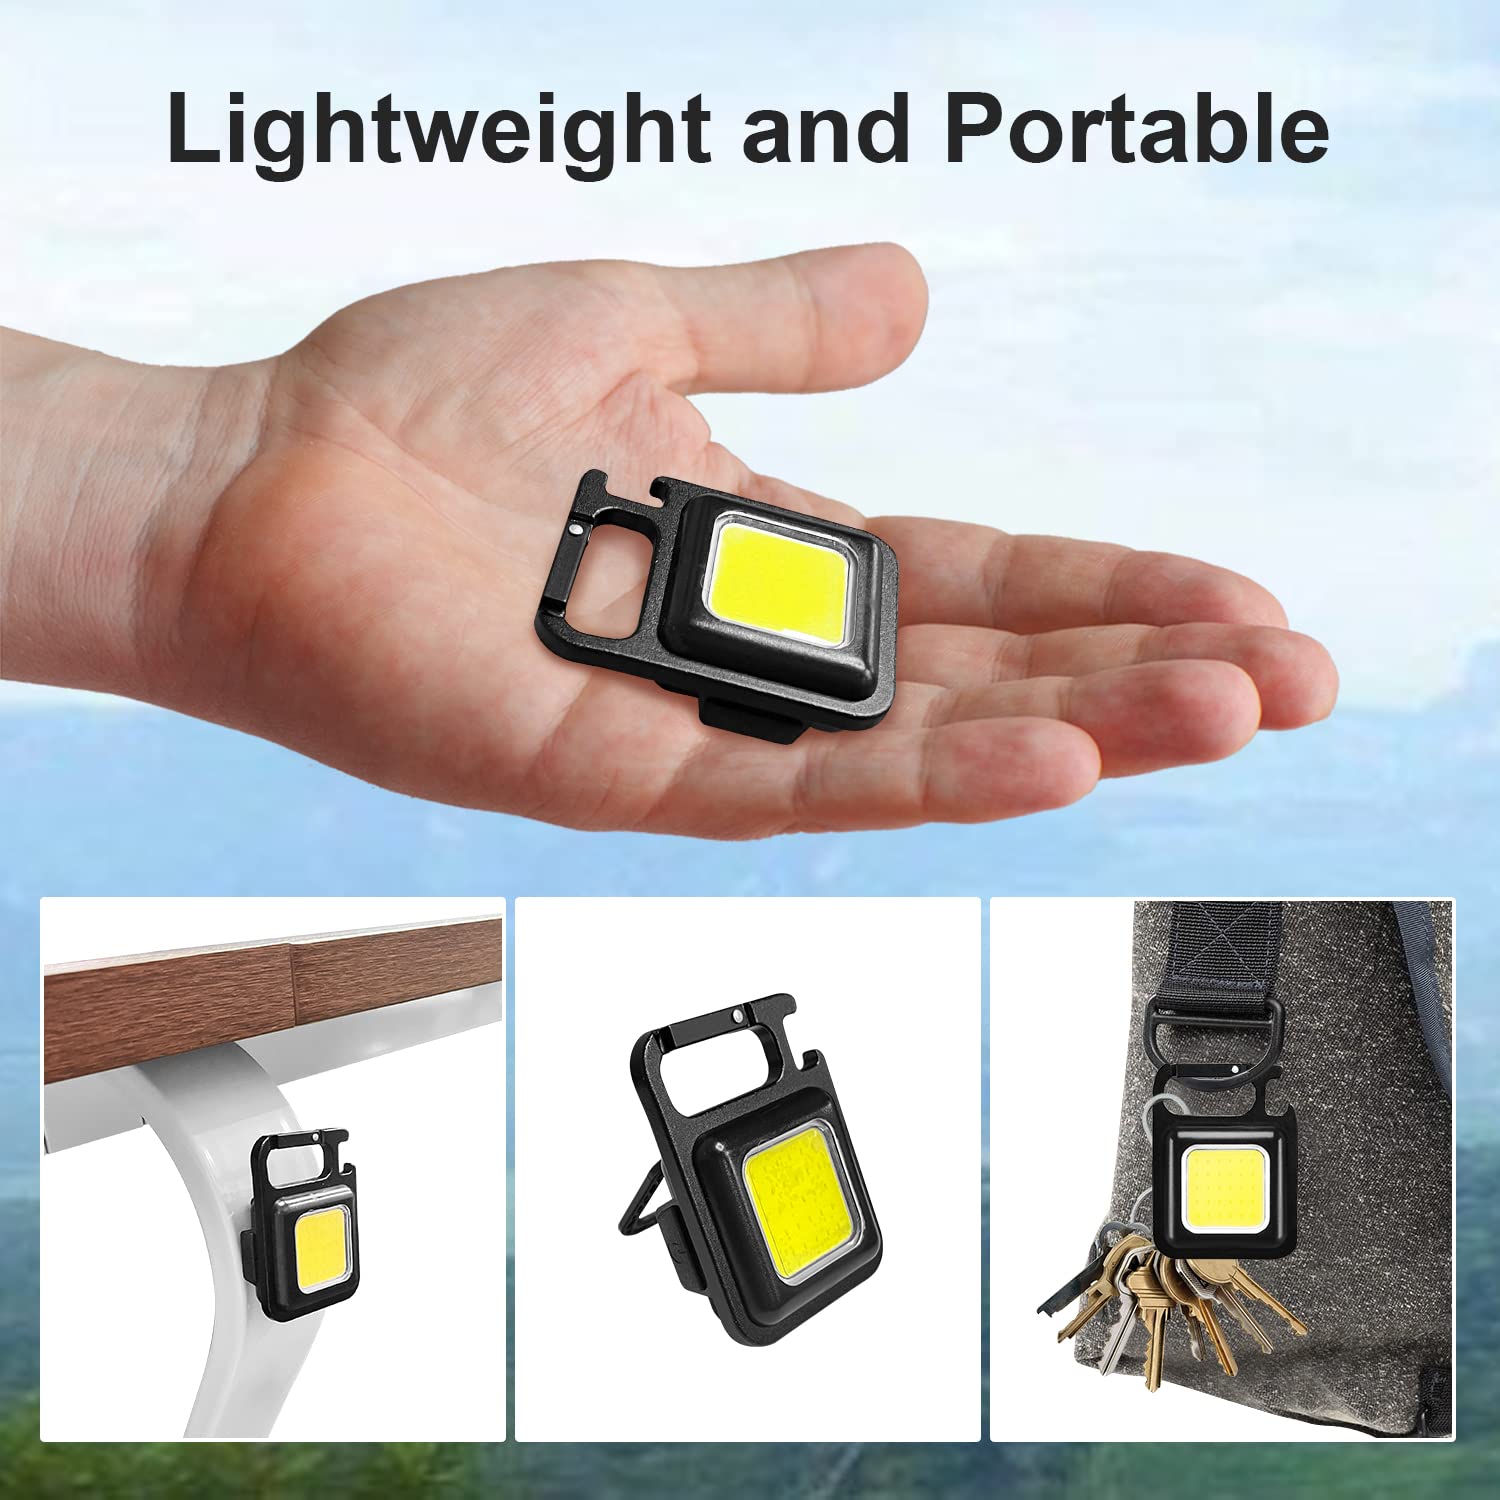 4035 Rechargeable Keychain Mini Flashlight with 4 Light Modes,Ultralight Portable Pocket Light with Folding Bracket Bottle Opener and Magnet Base for Camping Walking DeoDap